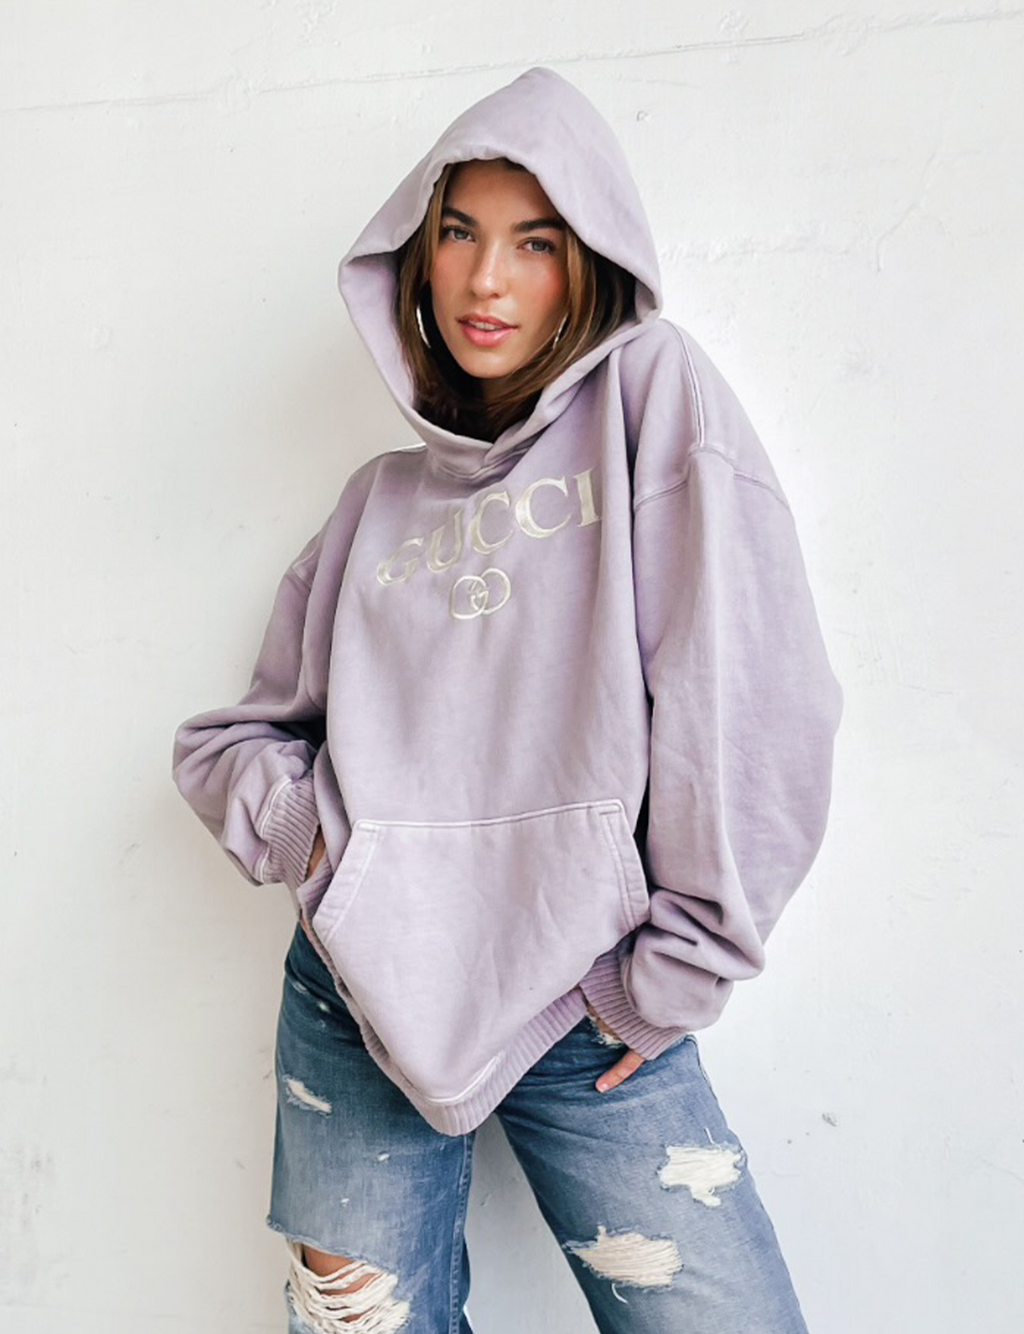 Gucci Cream Embroidered Fleece Hoodie, Lavender